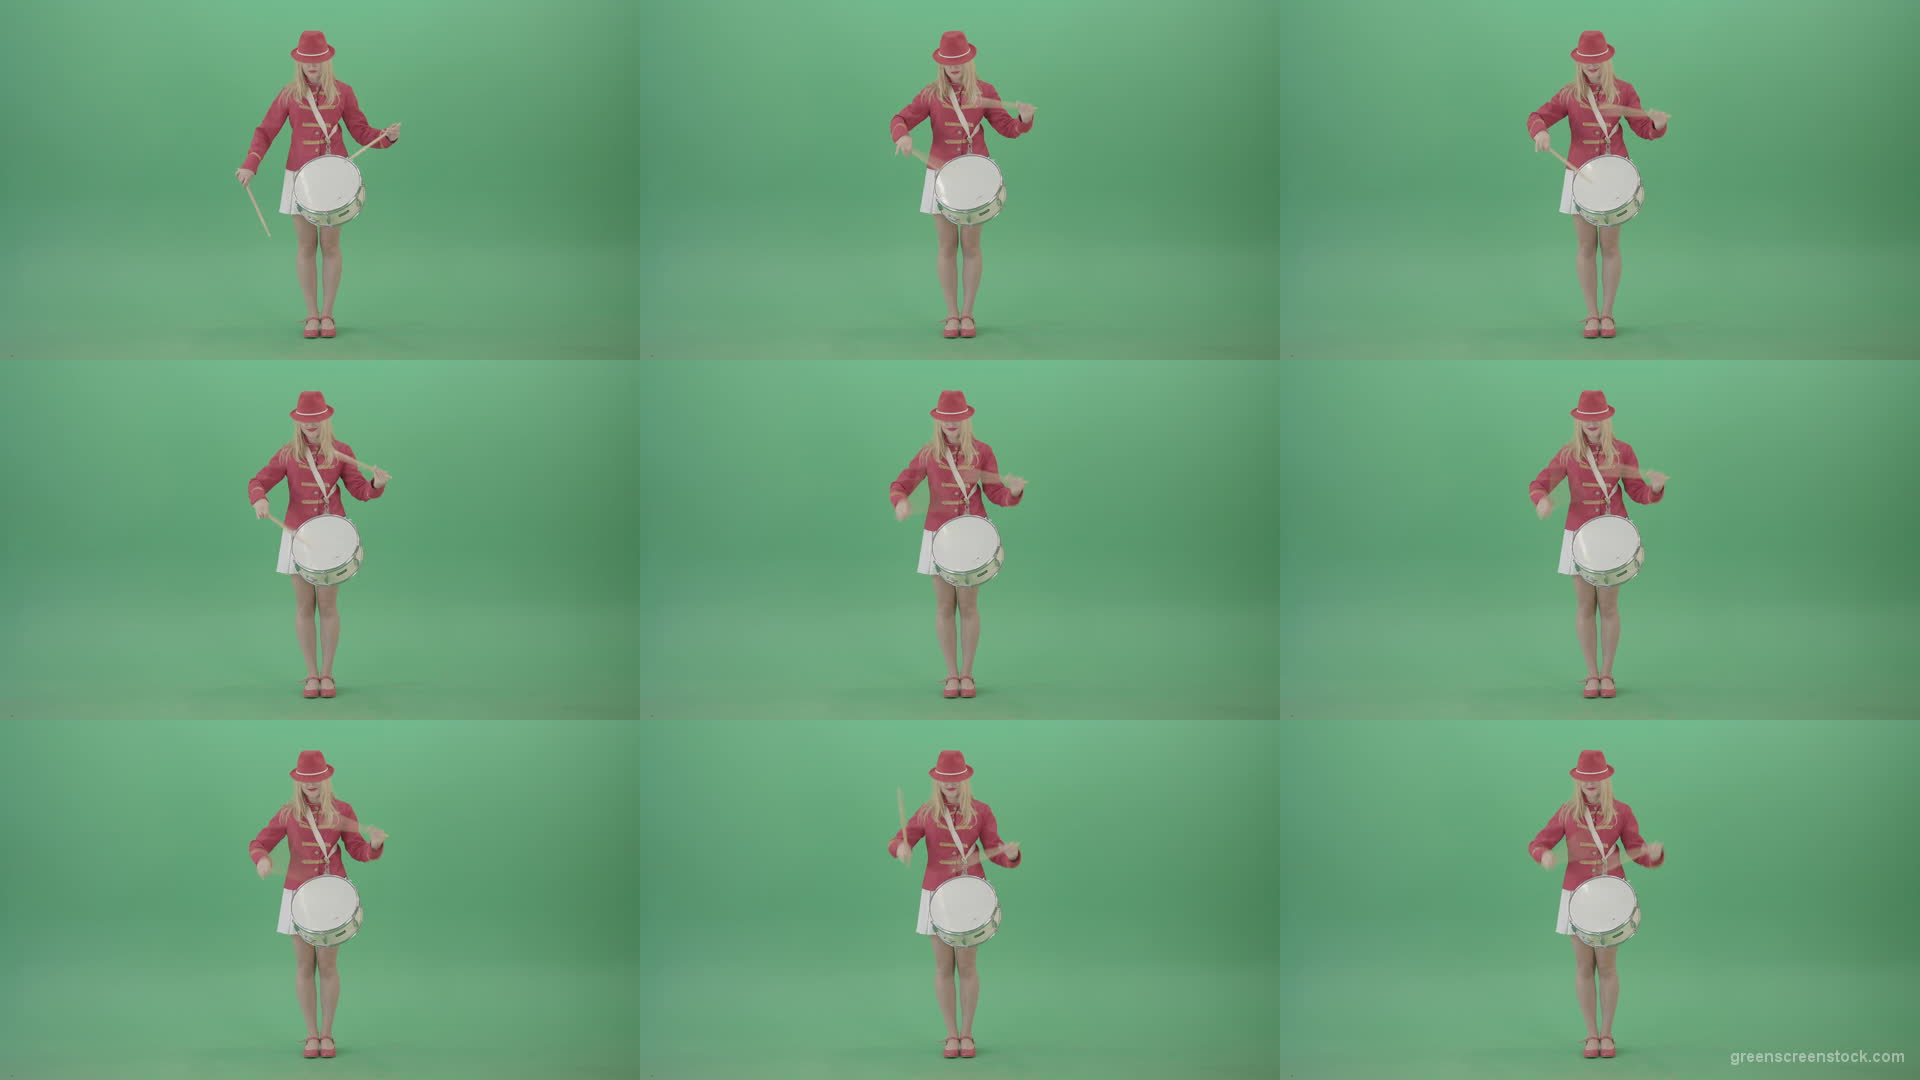 Blonde-woman-in-military-celebration-uniform-play-snare-drum-isolated-on-green-screen-4K-Video-footage-1920 Green Screen Stock